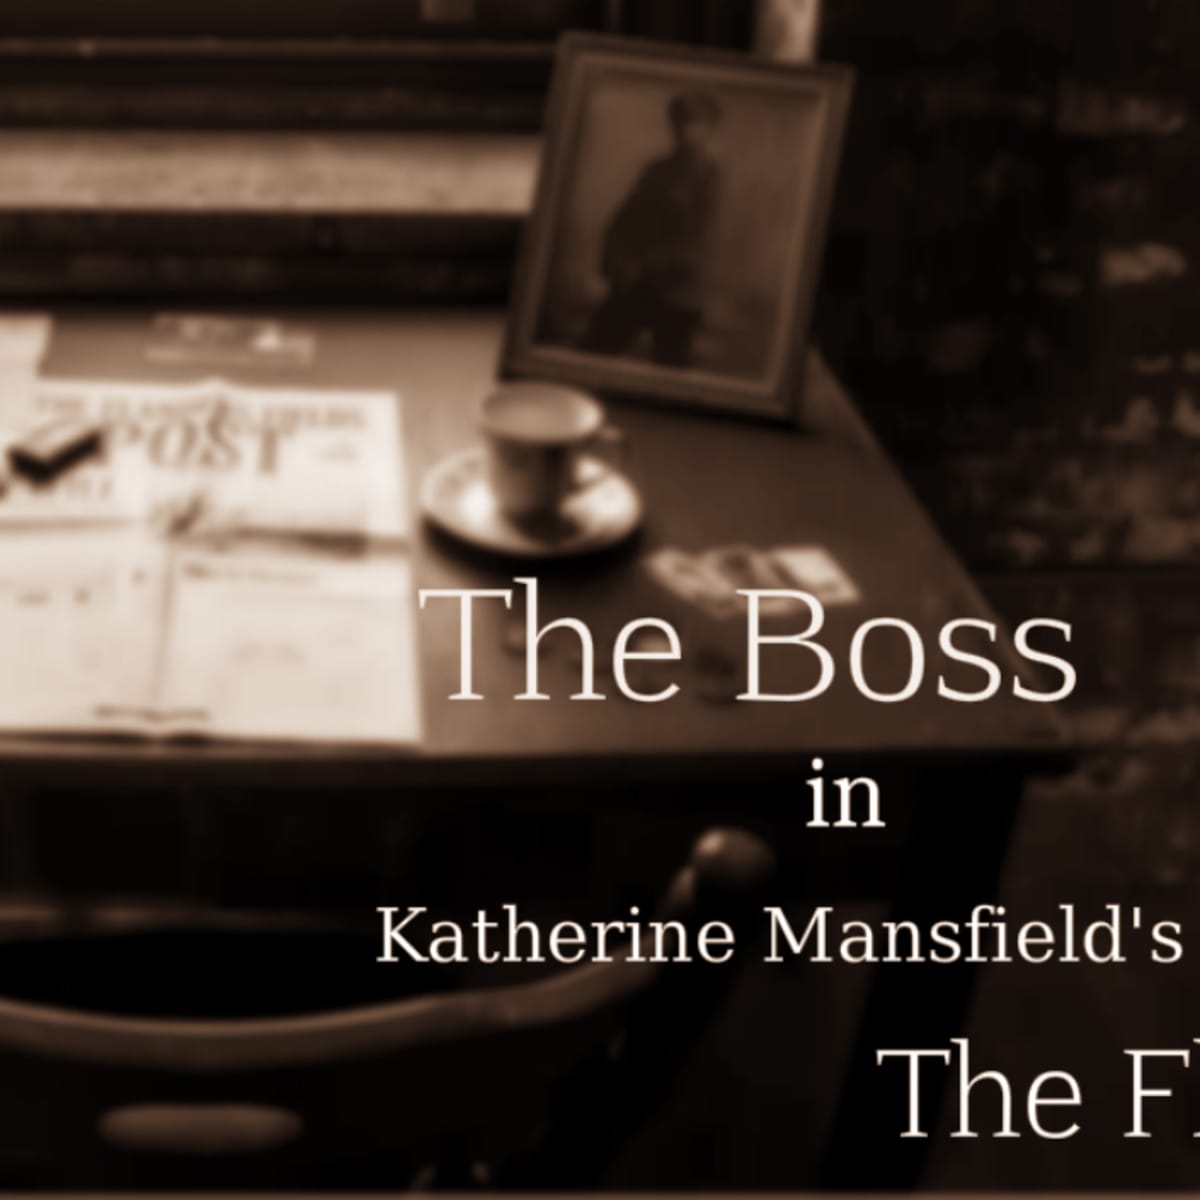 the fly by katherine mansfield questions